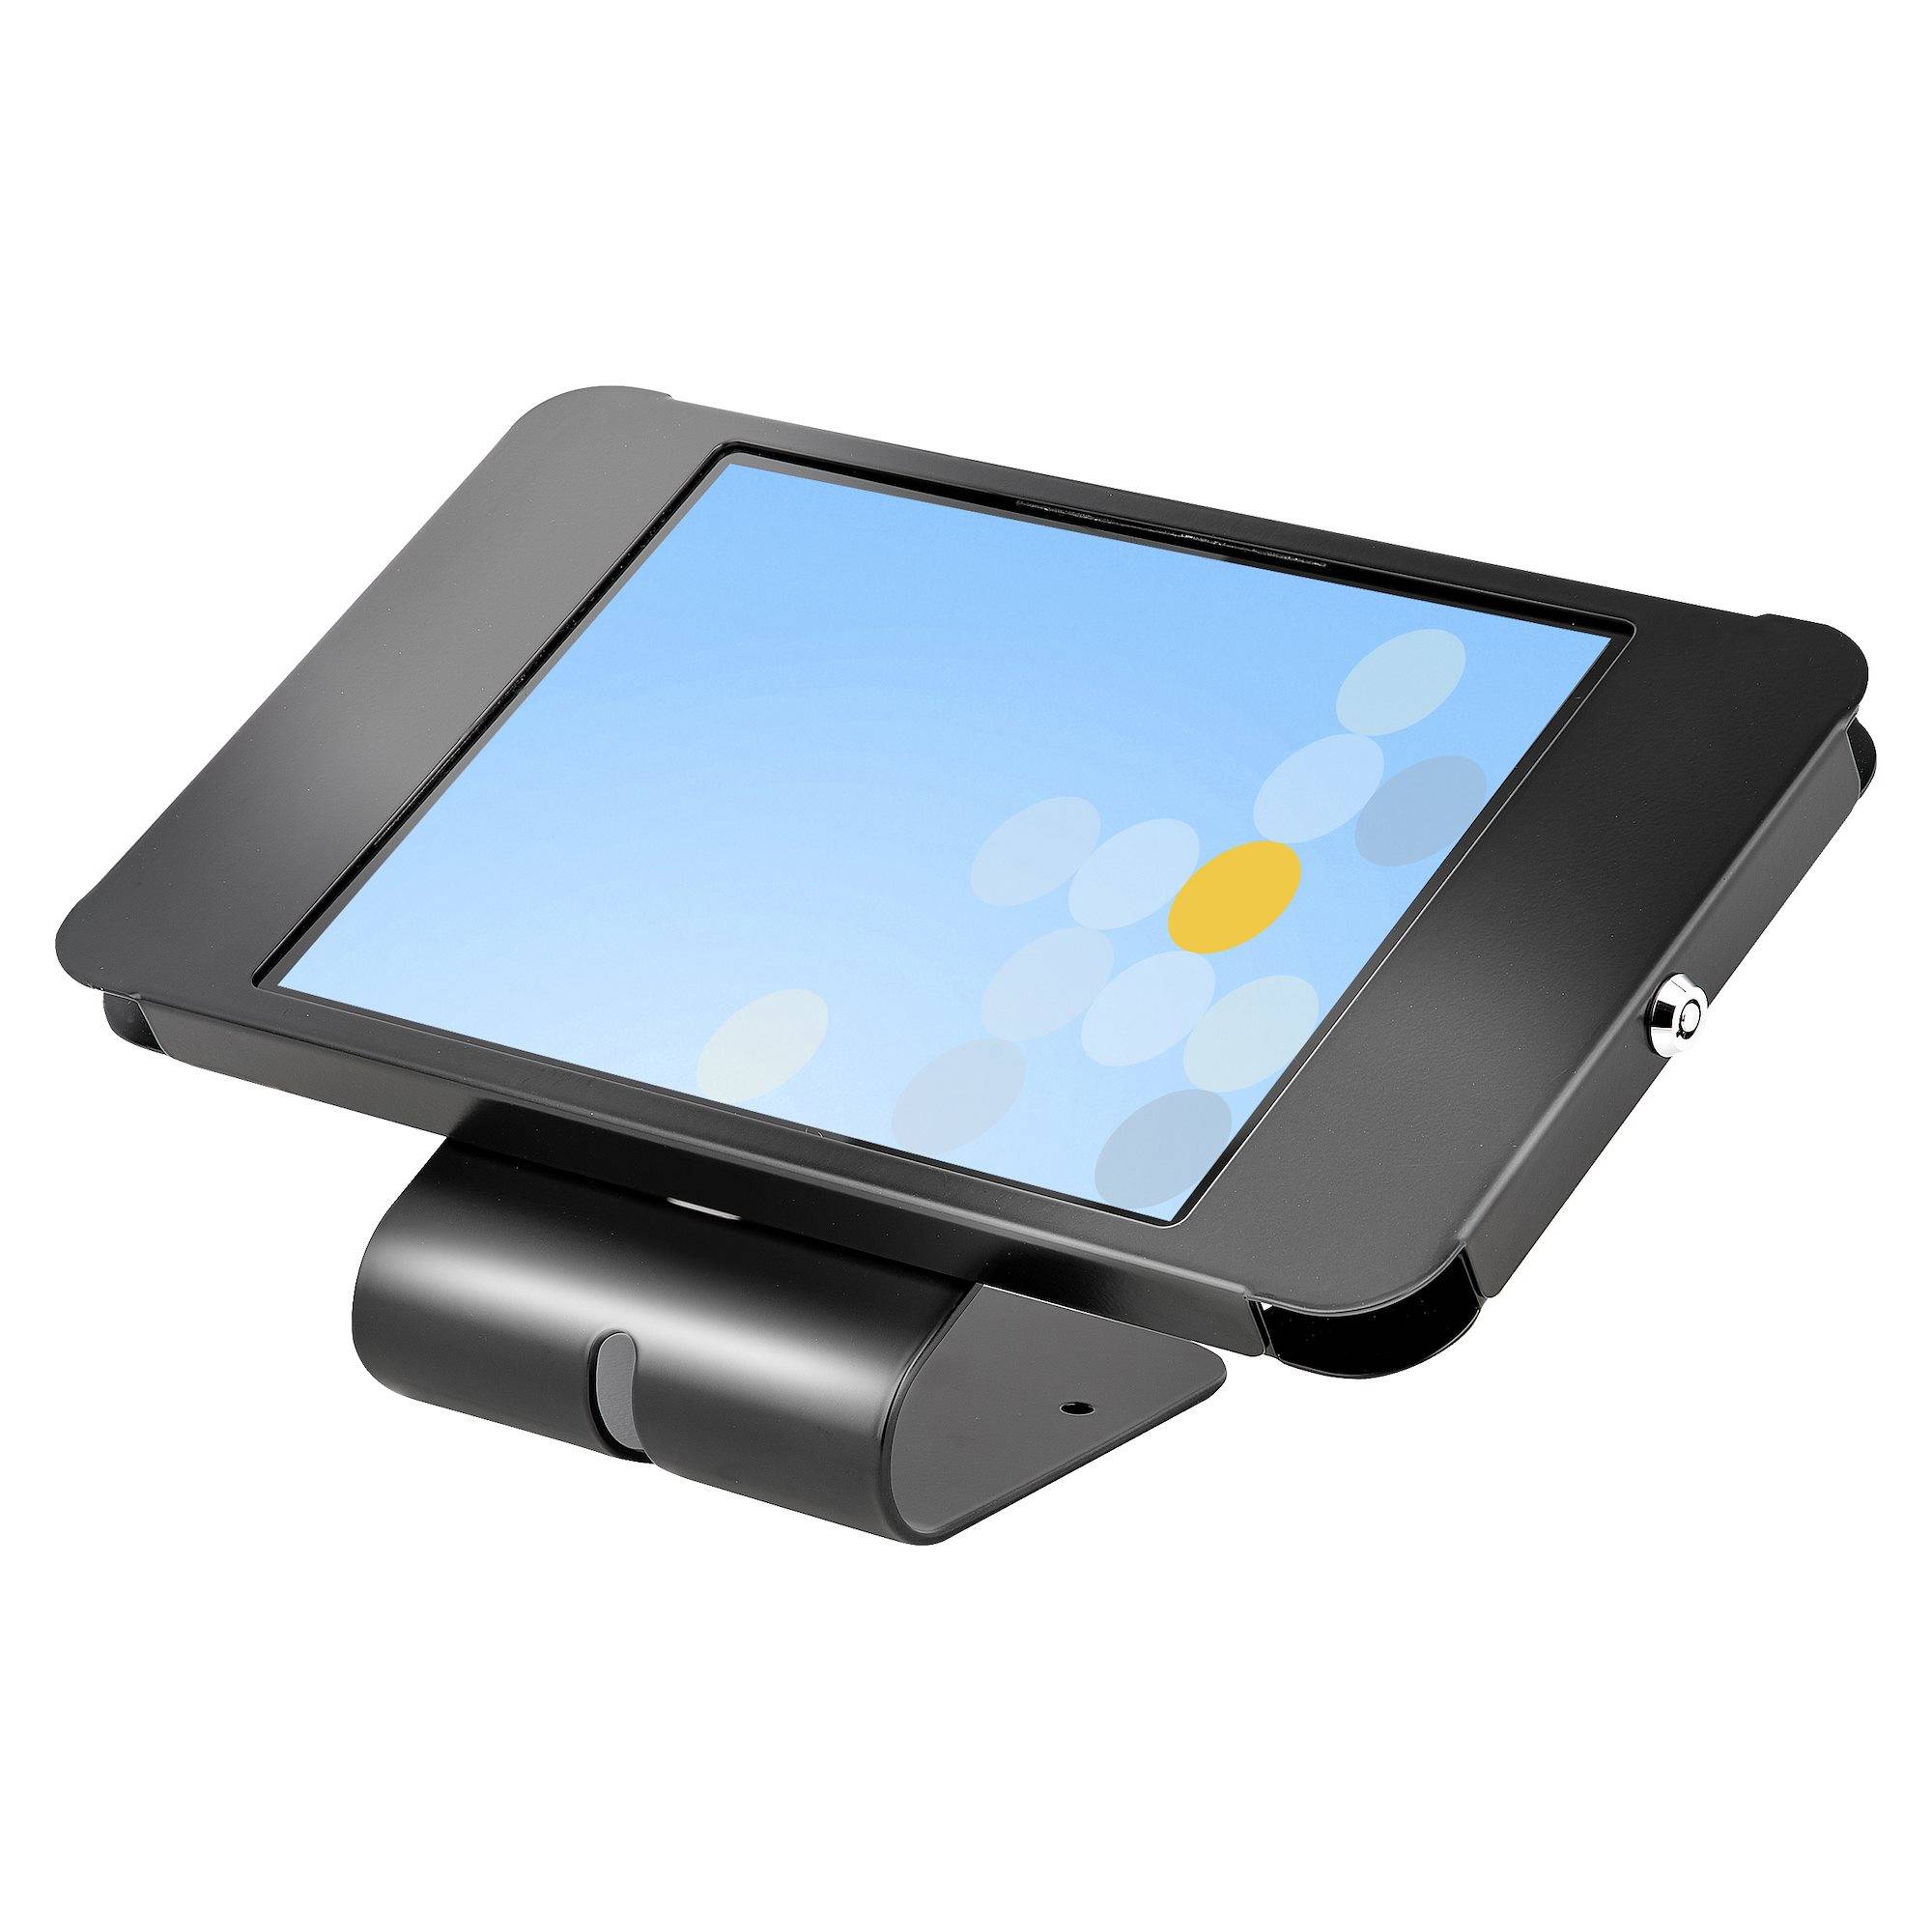 Rca Informatique - Image du produit : SECURE TABLET STAND - IPAD OR OTHER TABLET 10.2IN / 10.5IN